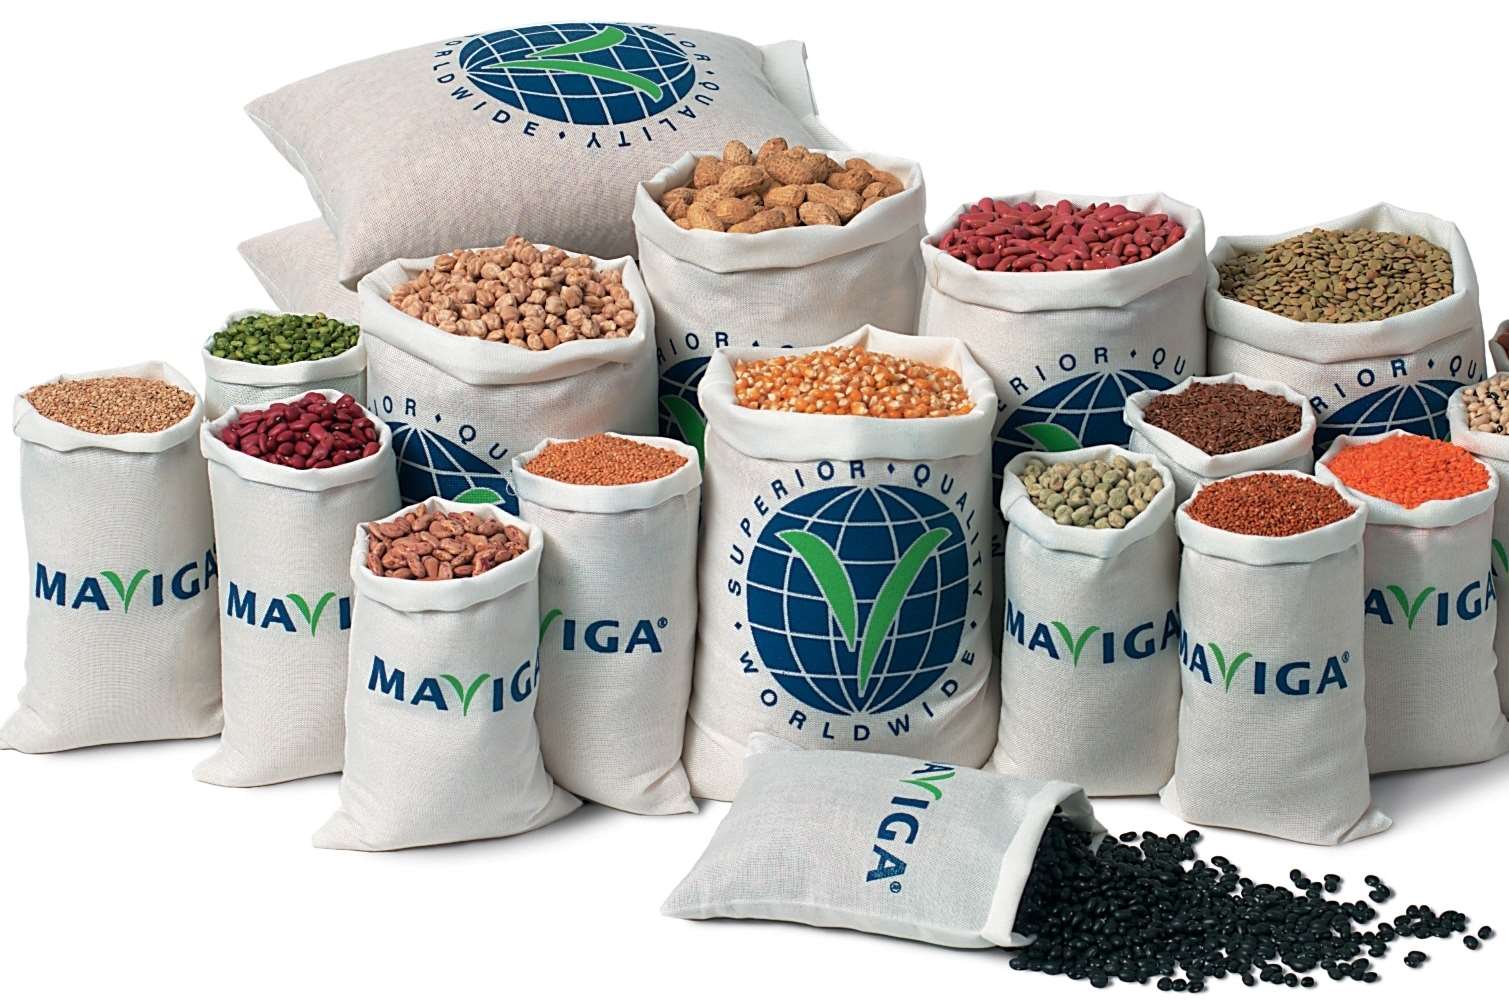 Maviga is a trader of pulses and dried crops across the globe